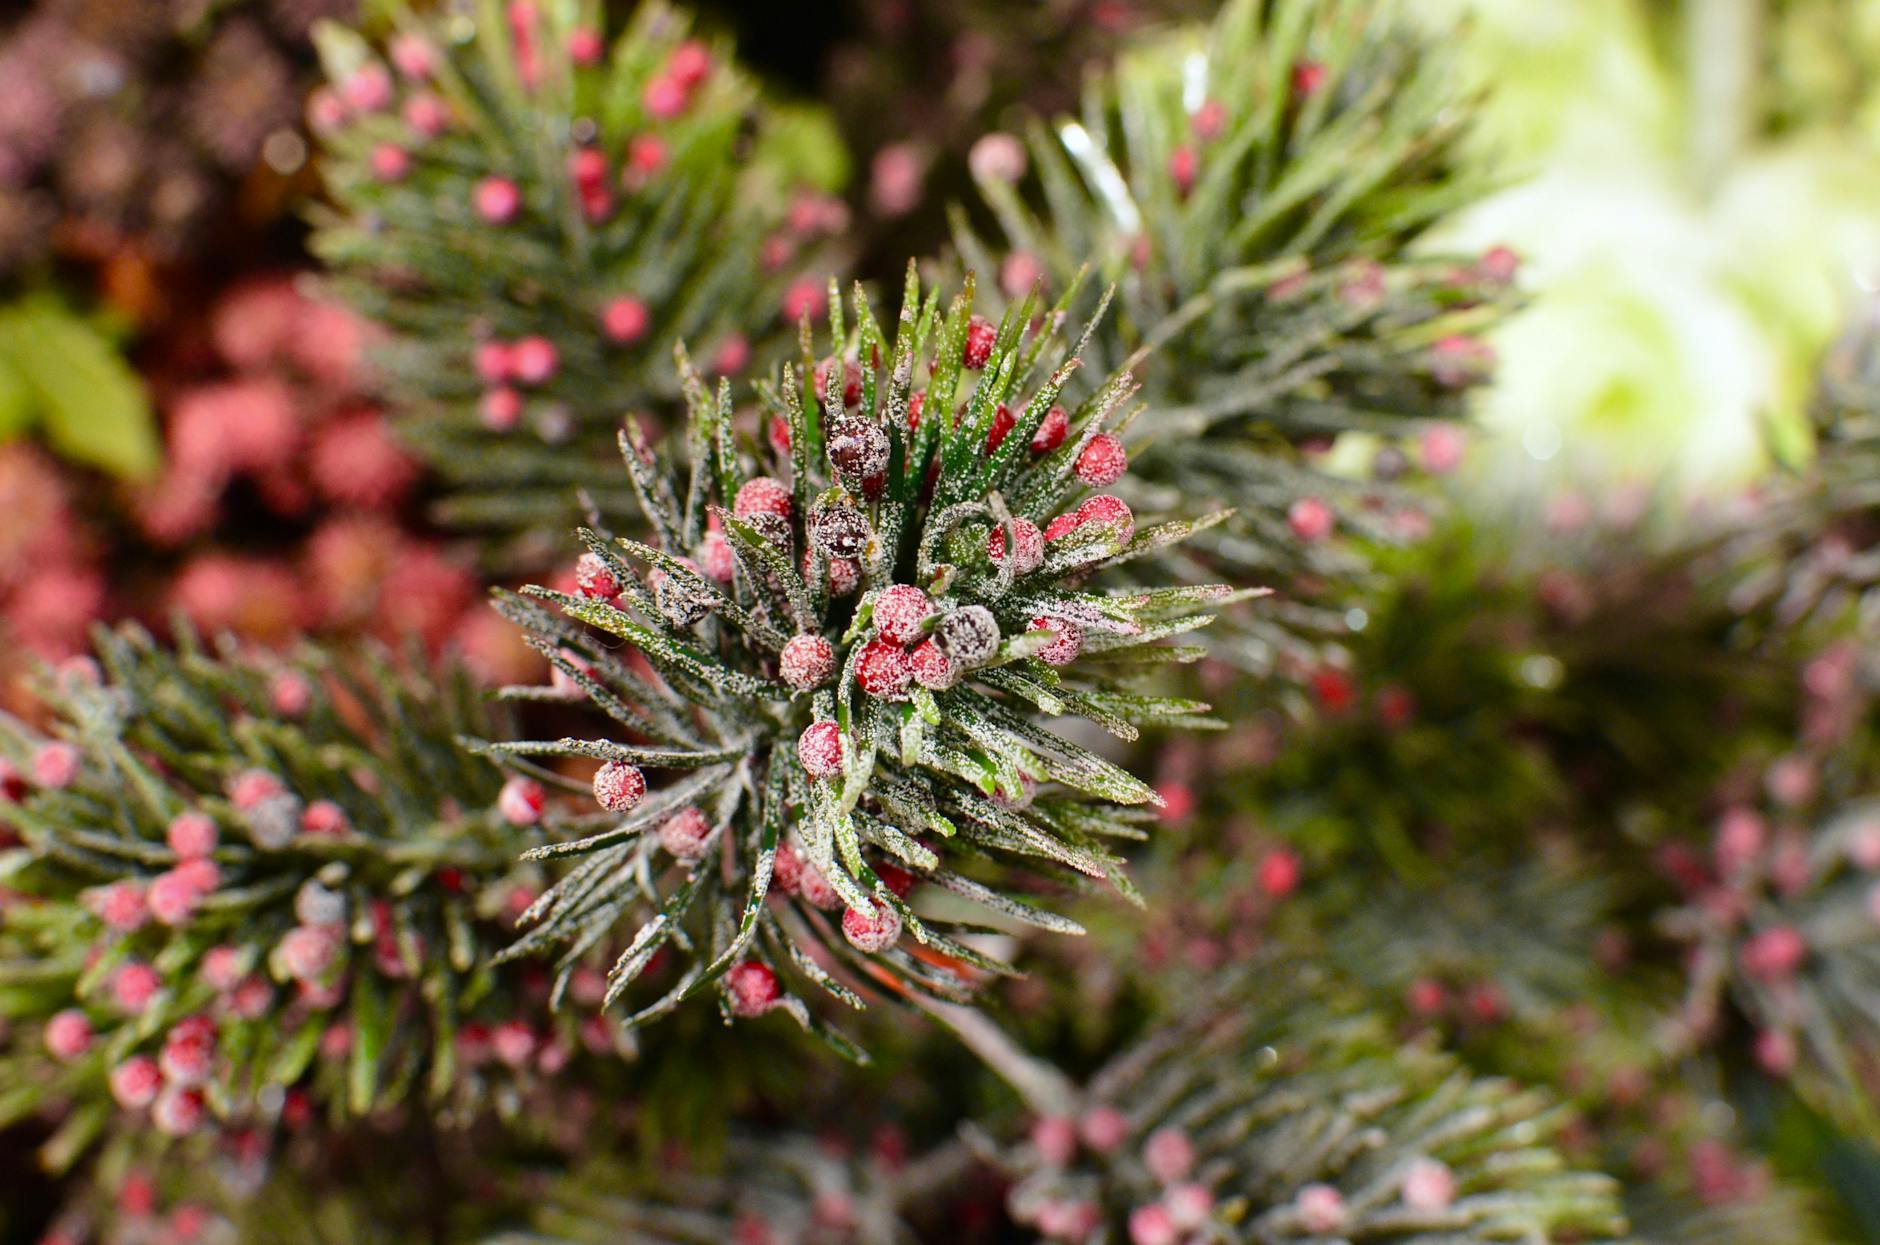 Textured background of coniferous tree branch with small red berries and long green needles